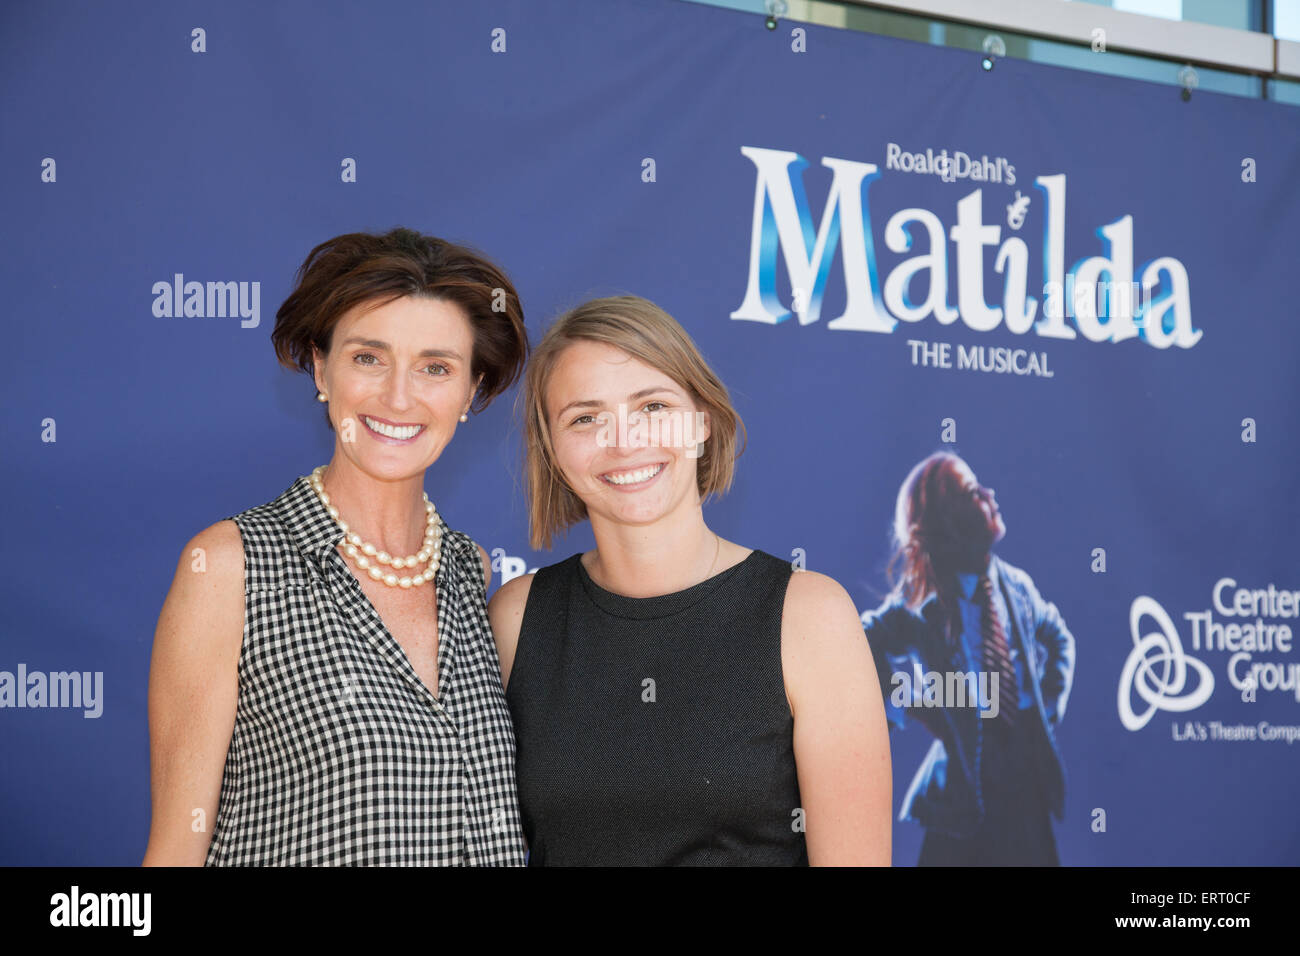 Los Angeles, USA. 07th June, 2015. Roald Dahl's daughter Lucy Dahl and granddaughter Chloe Dahl at the opening of 'Matilda the Musical', based on the book by Roald Dahl, at the Ahmanson Theatre in Los Angeles, CA, USA on June 7, 2015 Credit:  Kayte Deioma/Alamy Live News Stock Photo